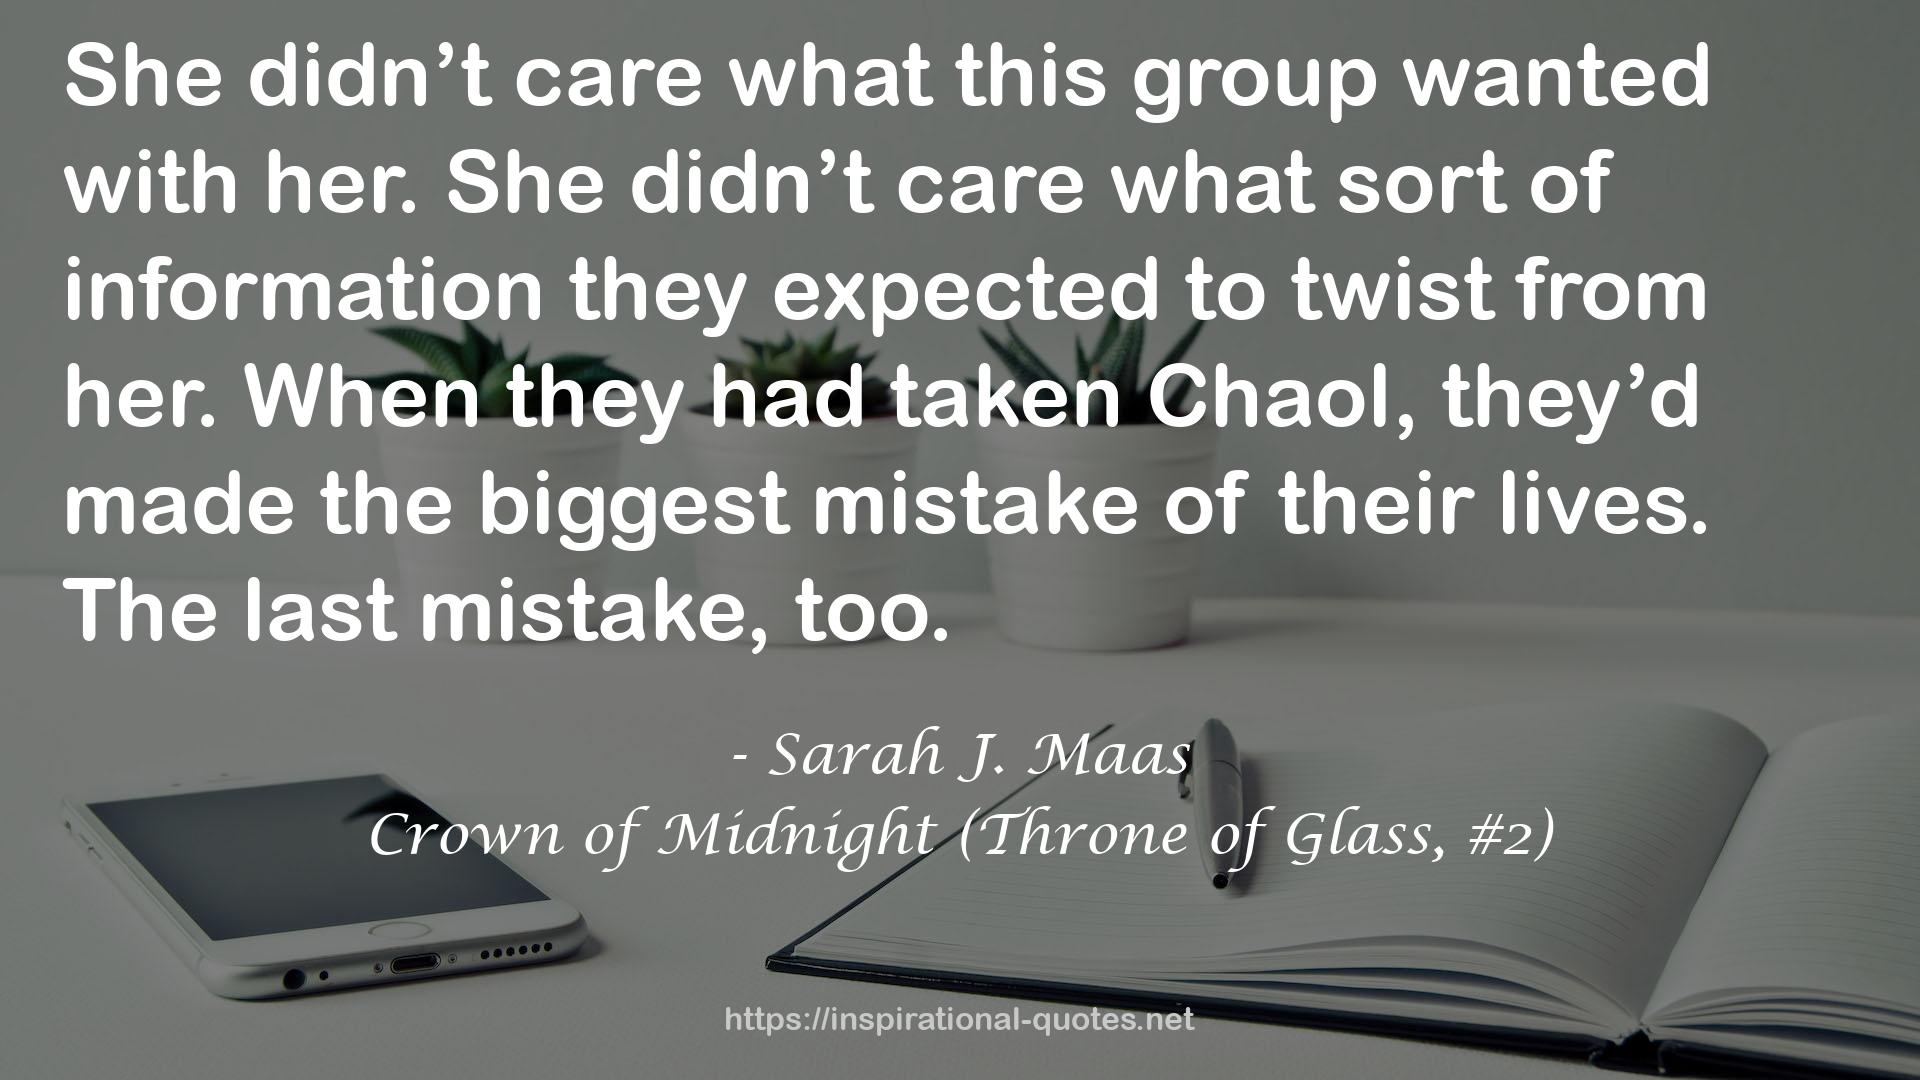 Crown of Midnight (Throne of Glass, #2) QUOTES